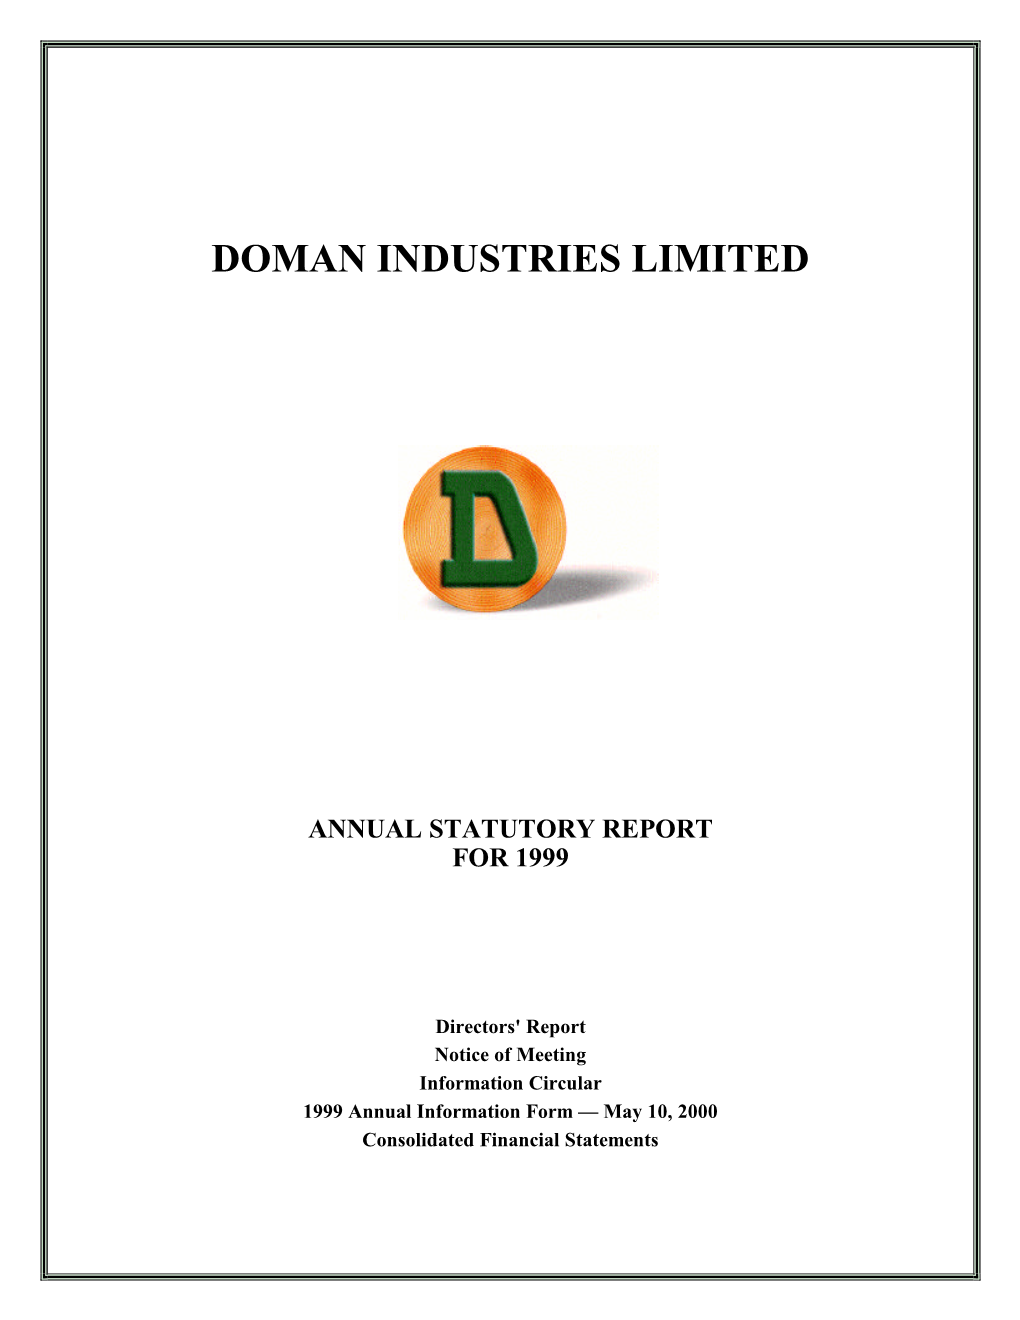 Doman Industries Limited